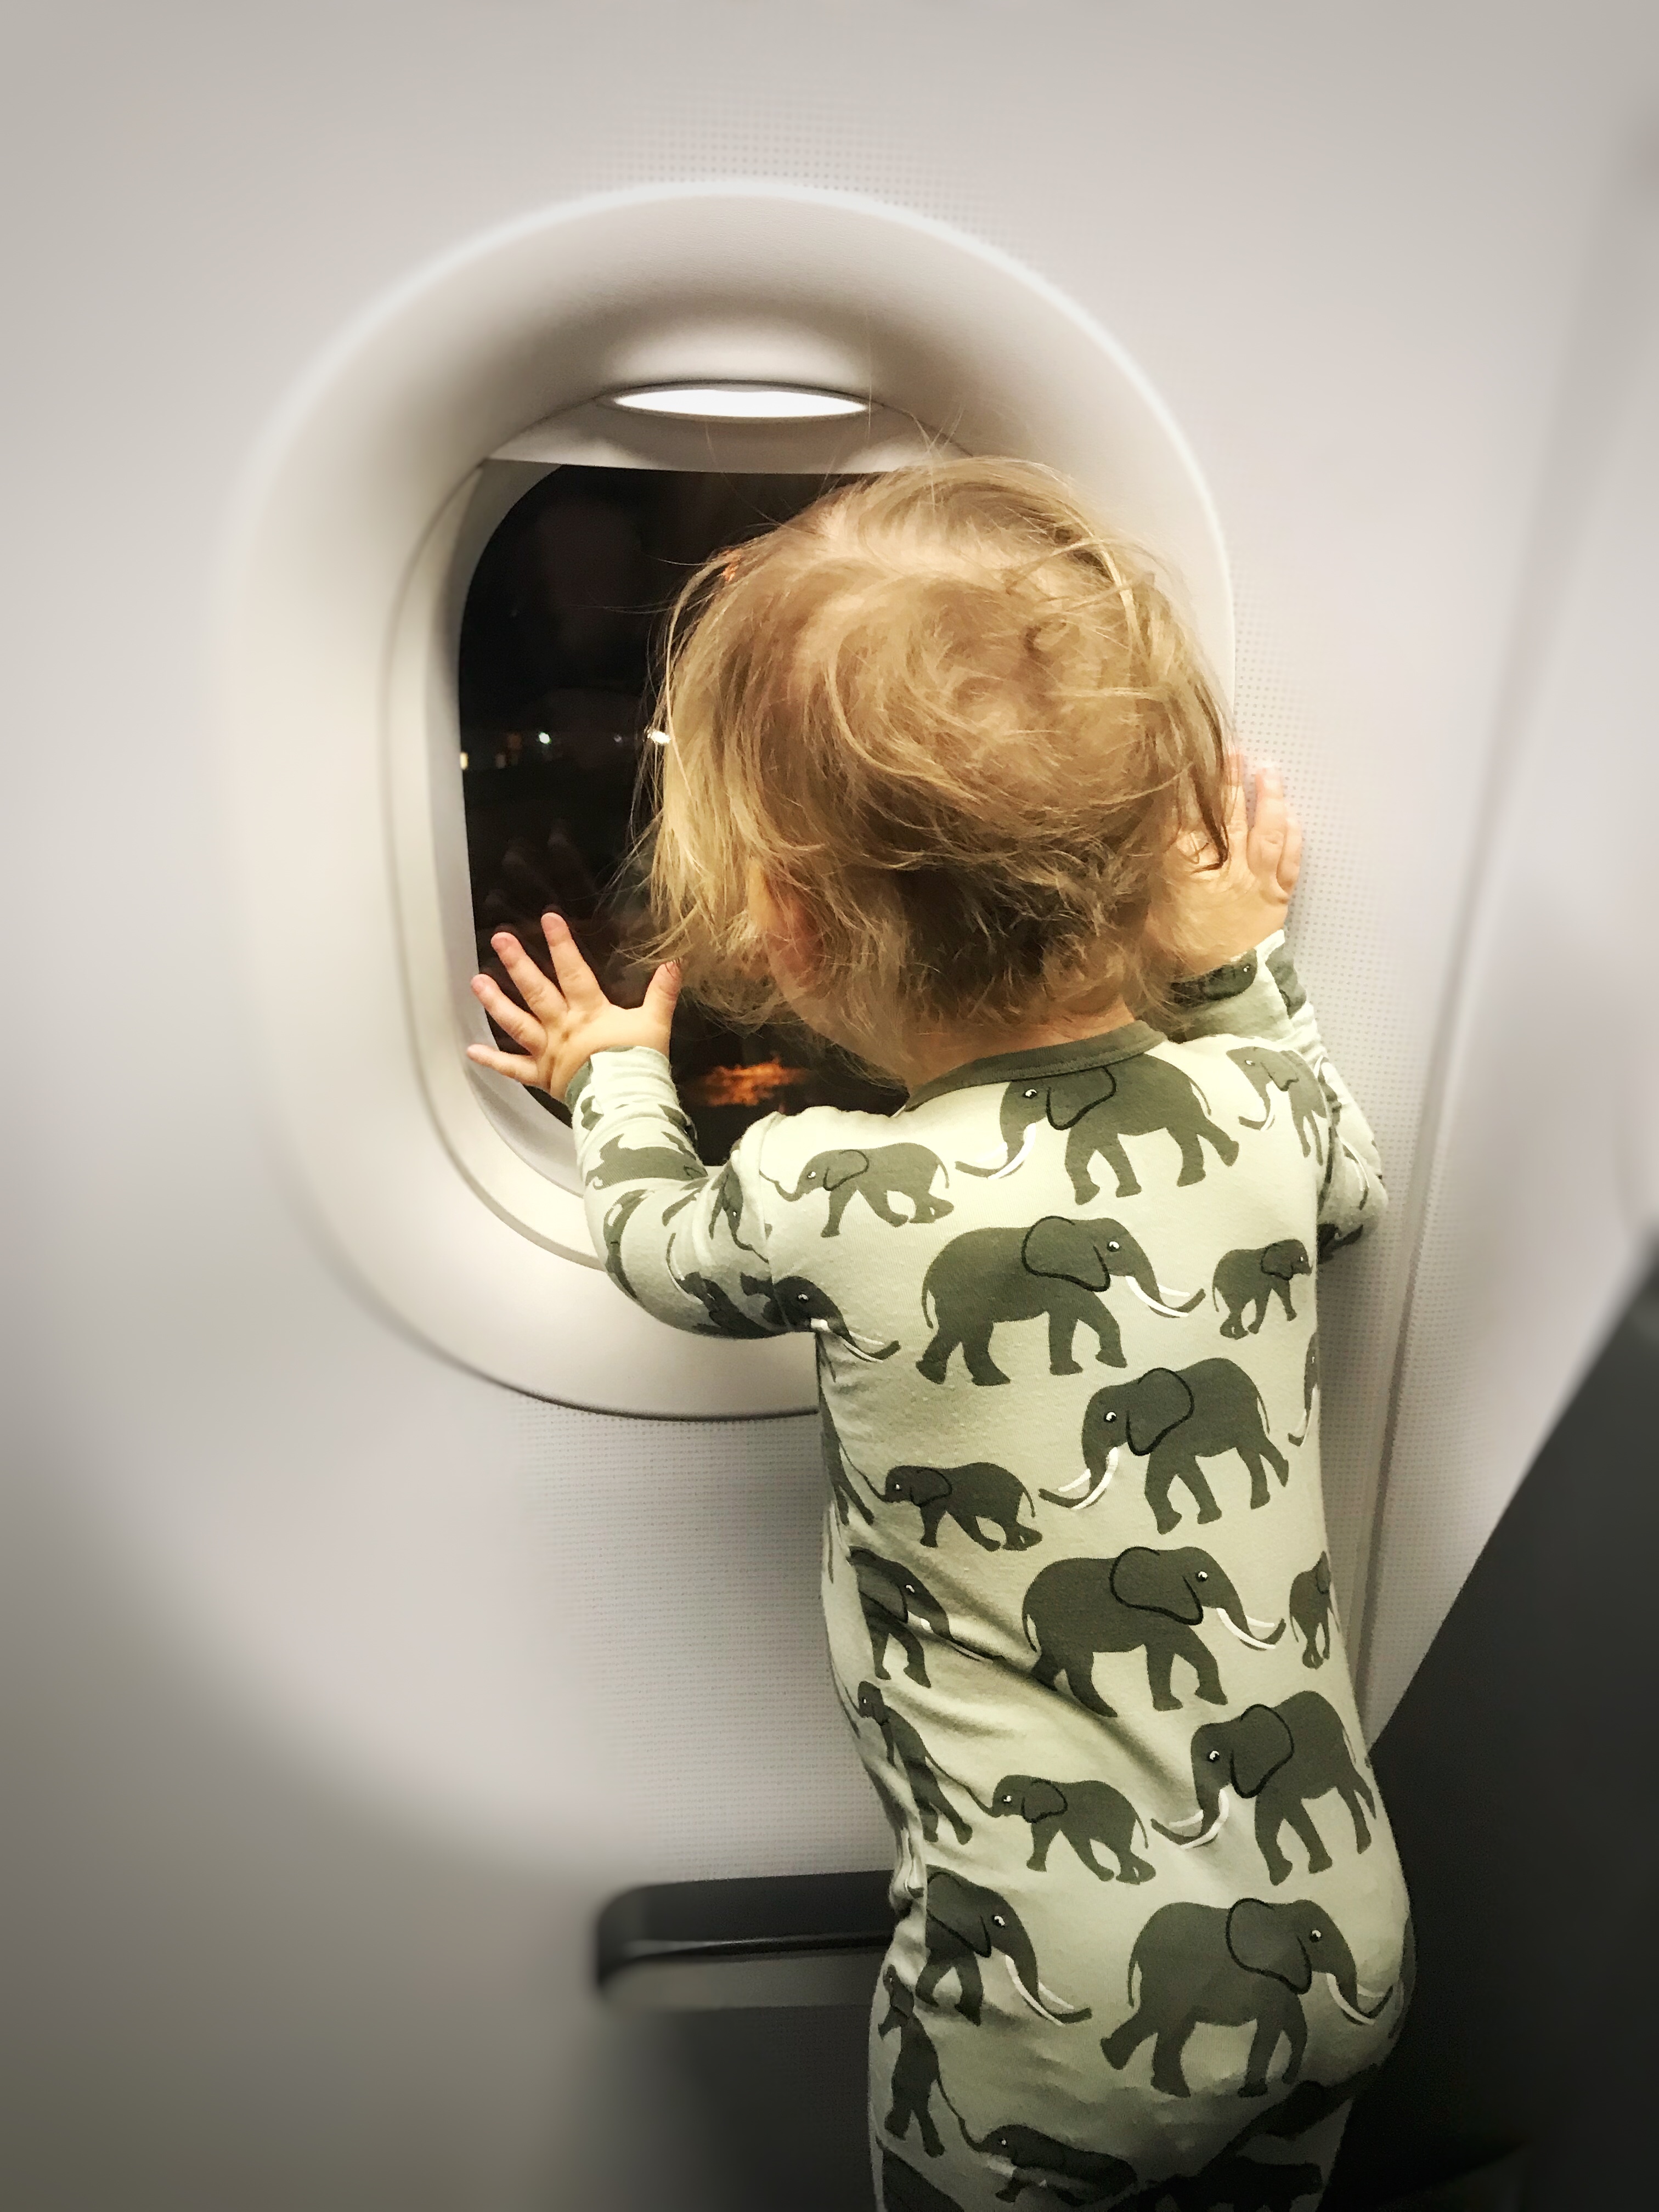 Traveling with an infant